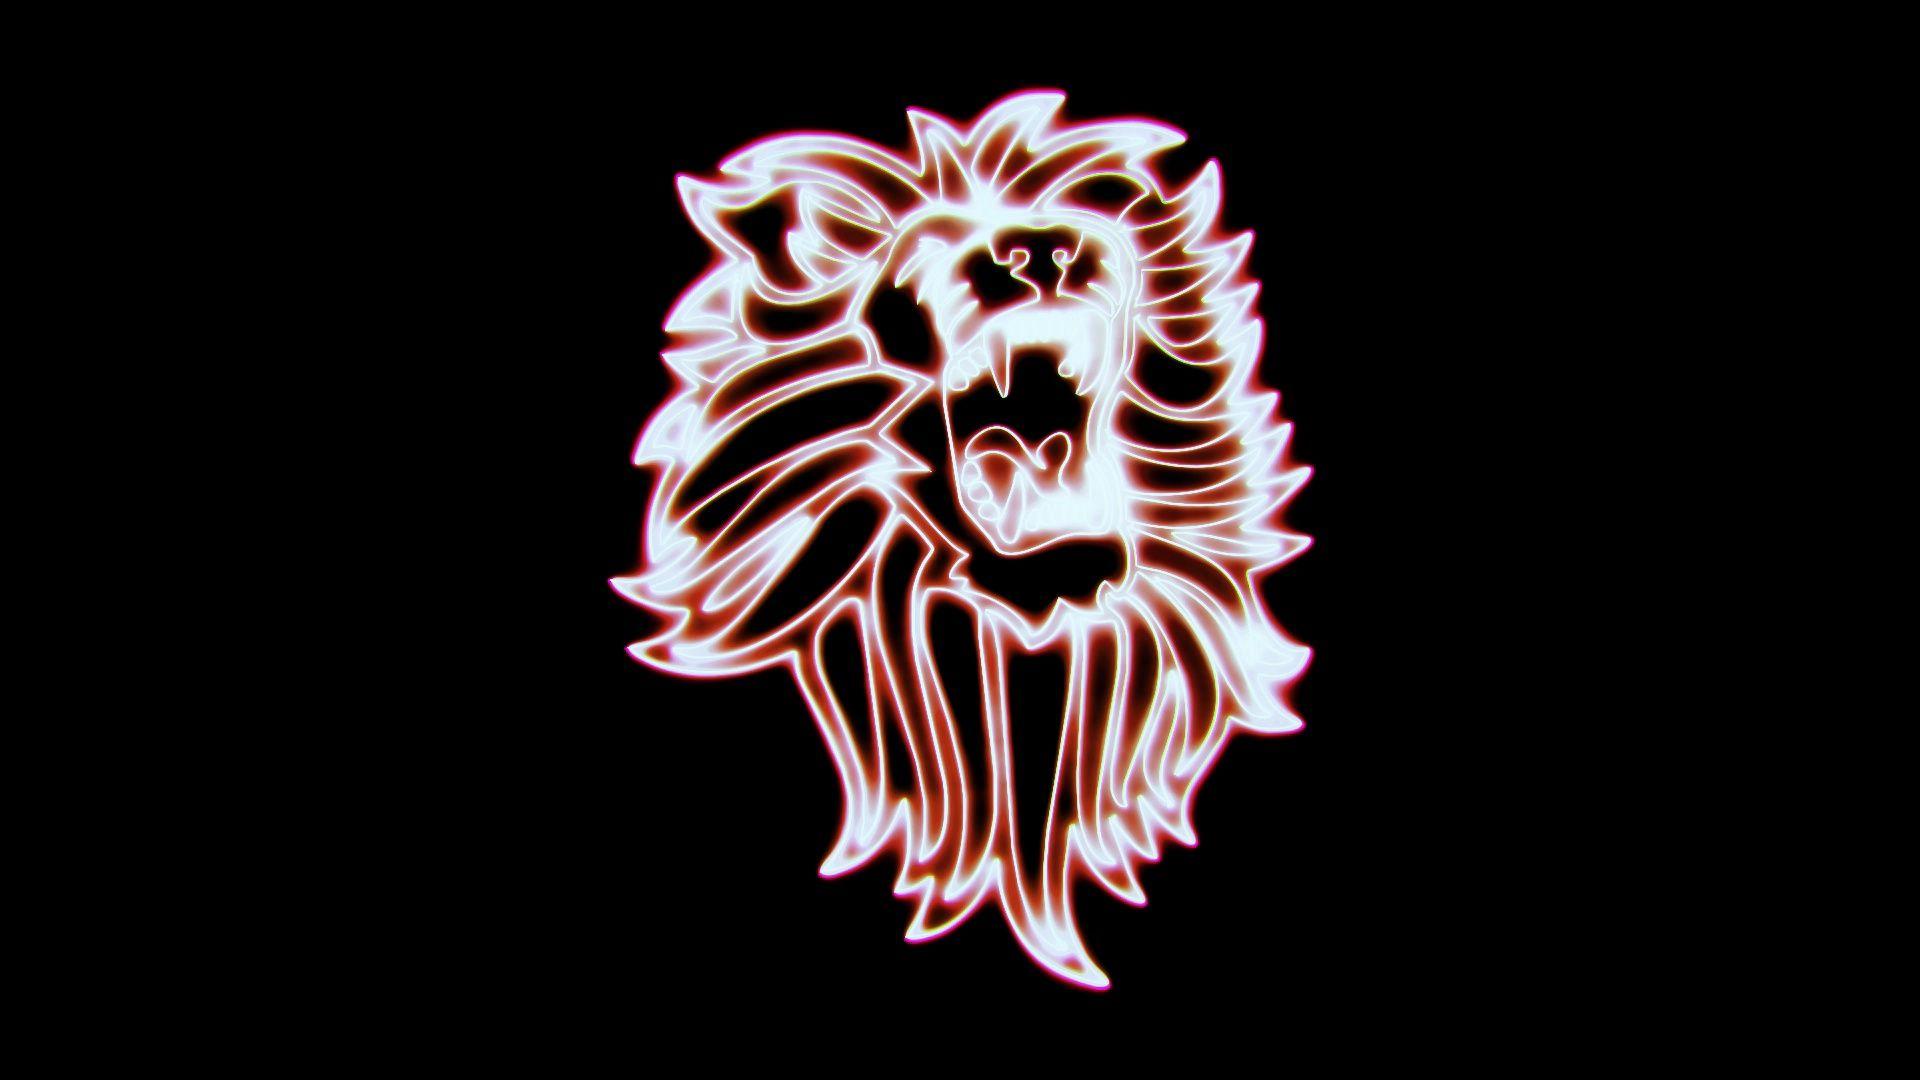 Red and White Lion Logo - Red White Lion Roaring Animated logo Loopable Graphic Element V1